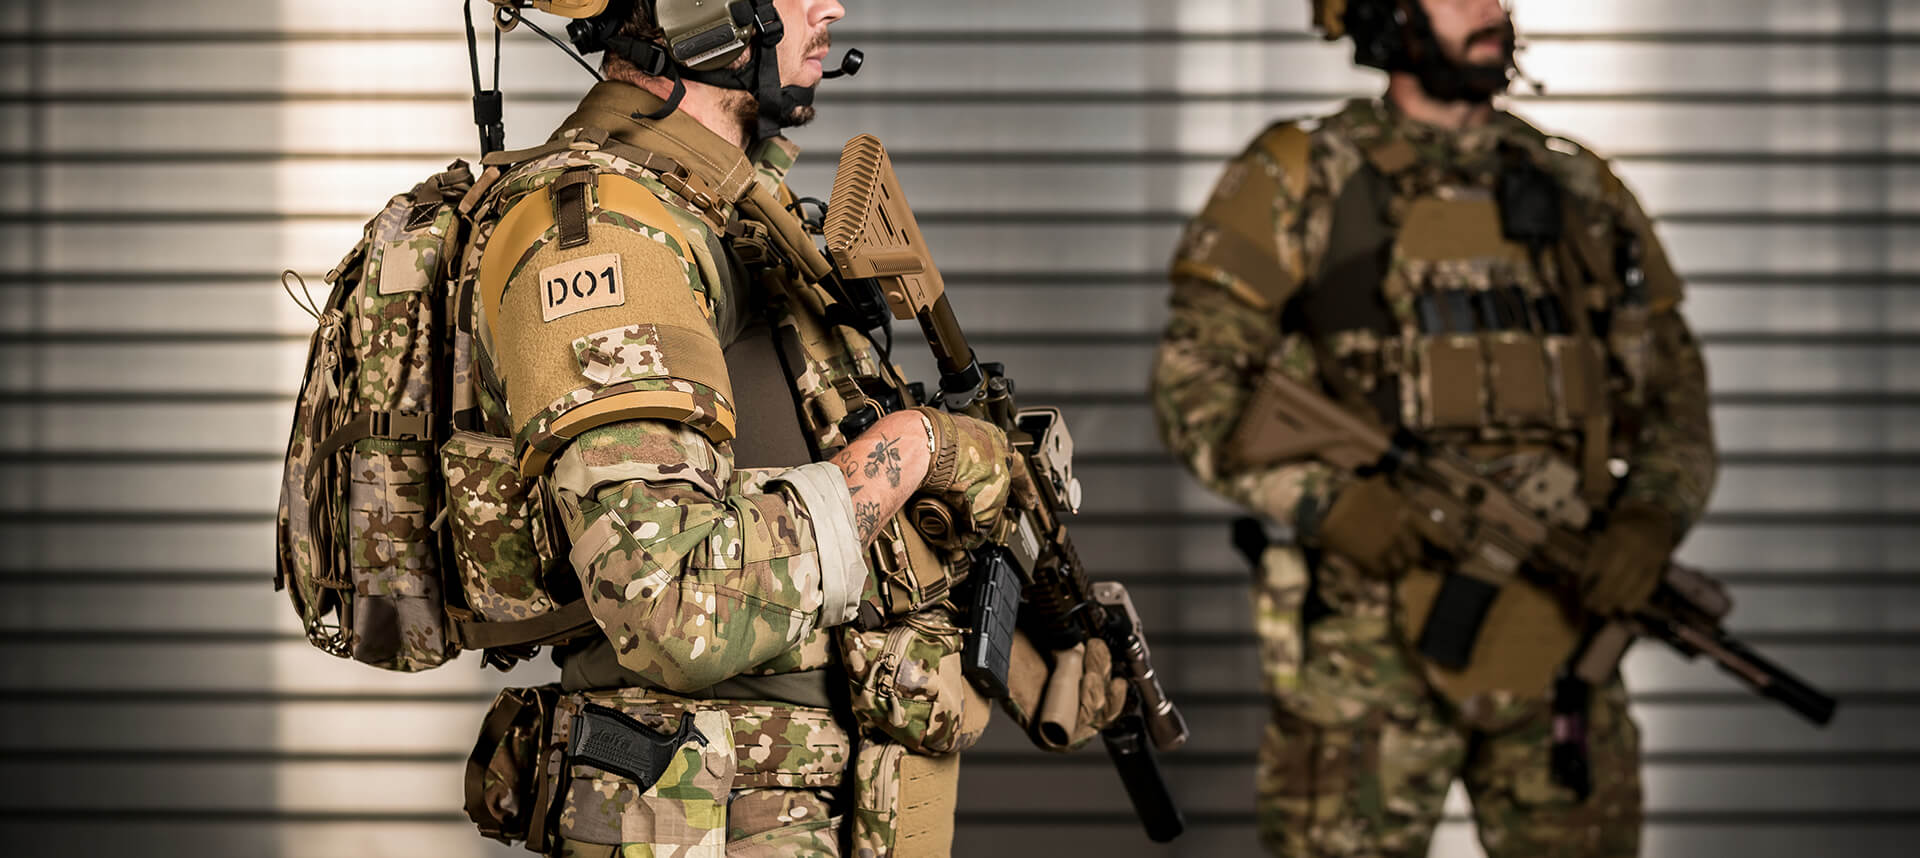 The role of ballistic testing and threat assessment in keeping operators safe